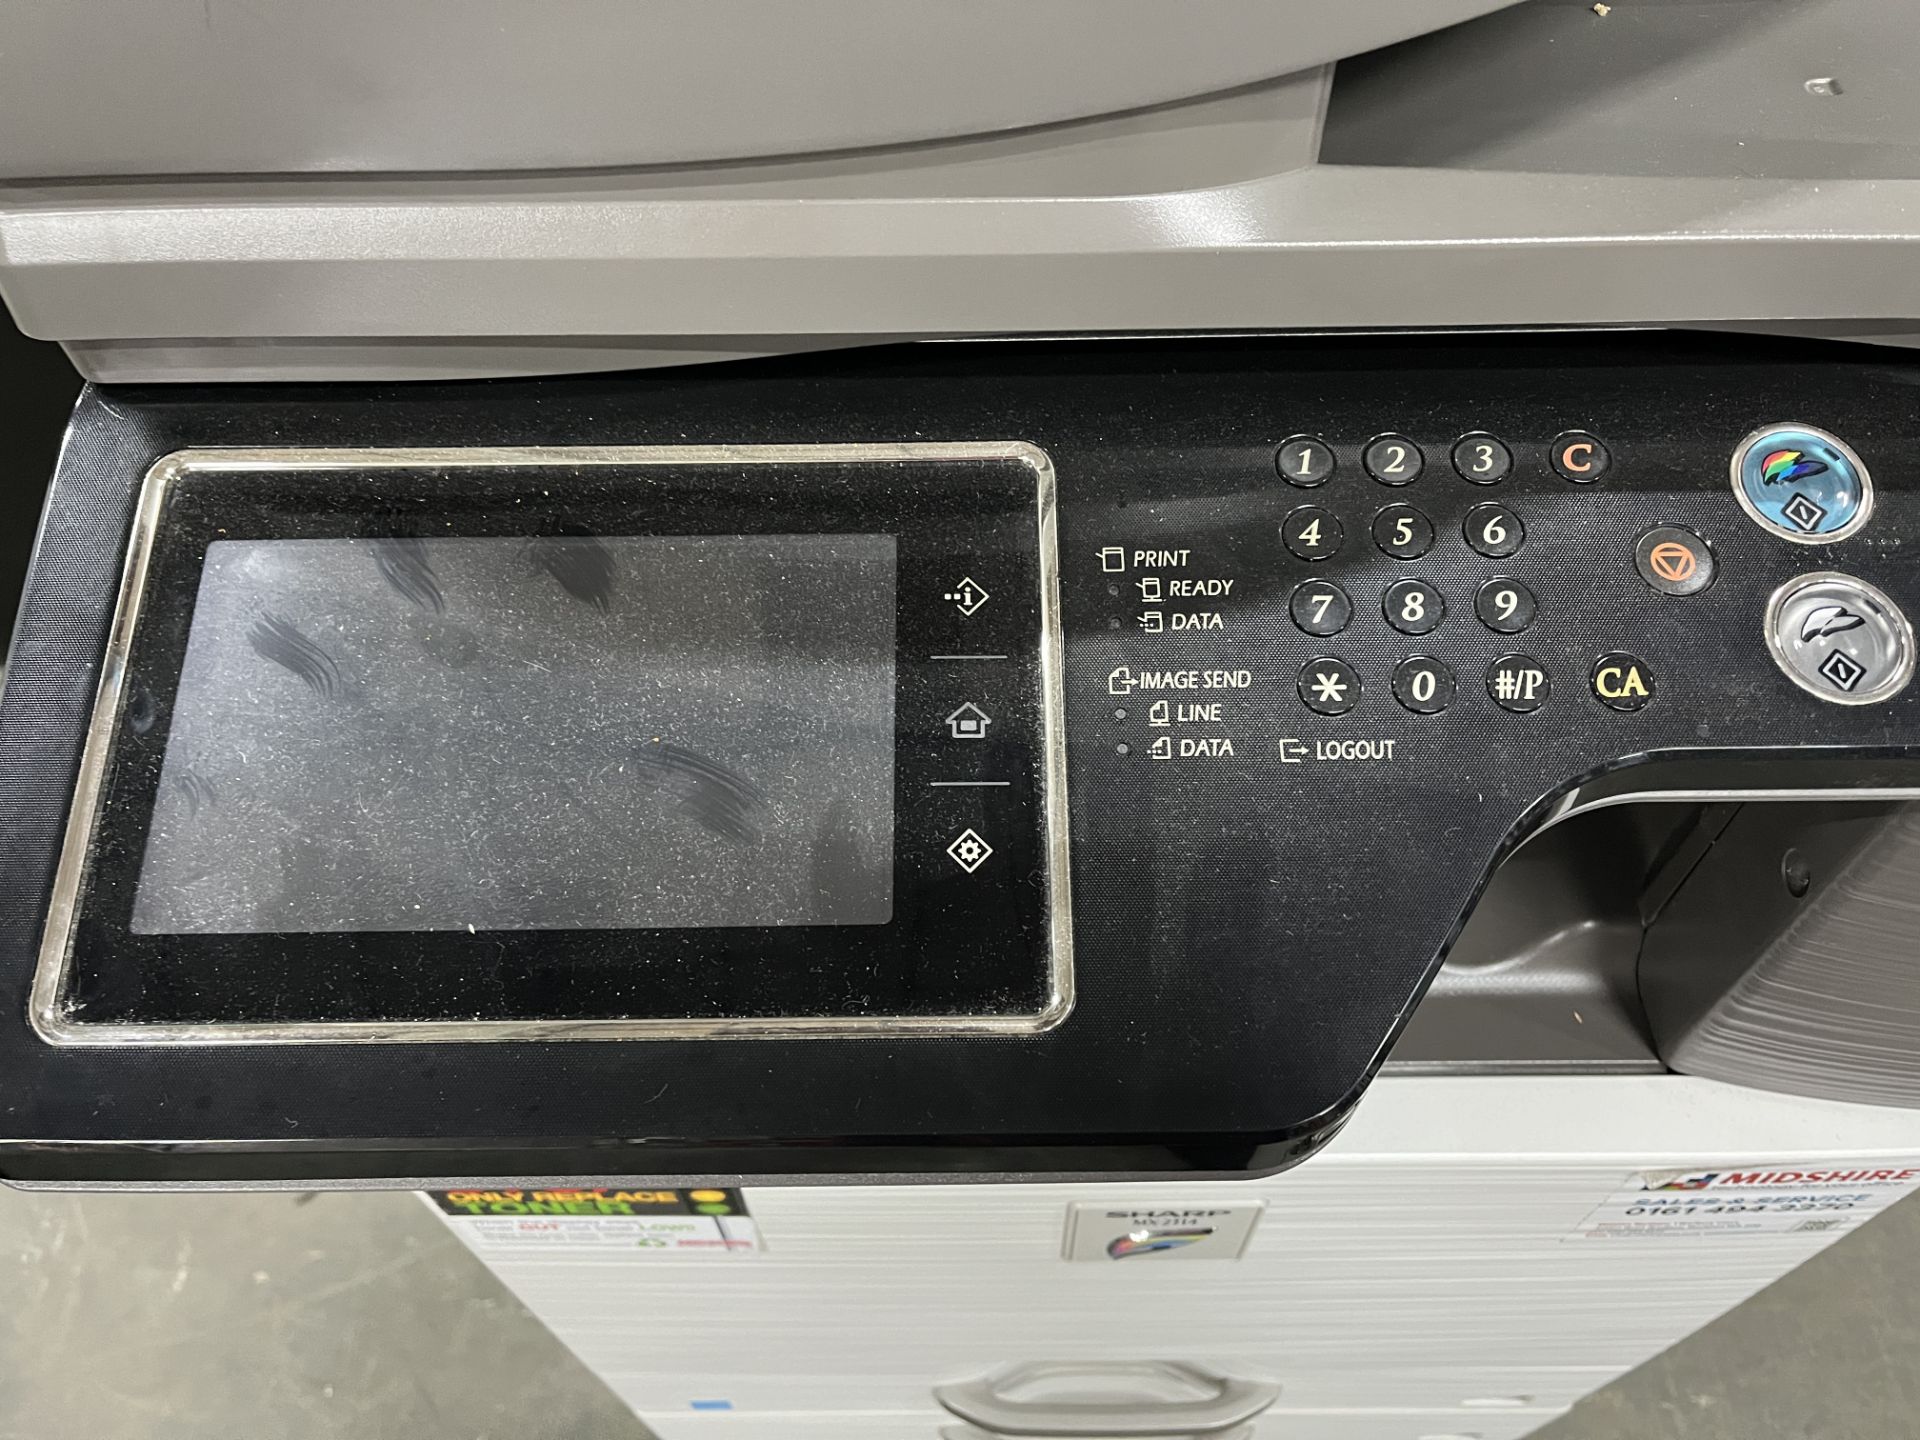 Sharp MX2314 A3 Colour Multi-functional Photocopier Printer & Scanner - Image 2 of 7